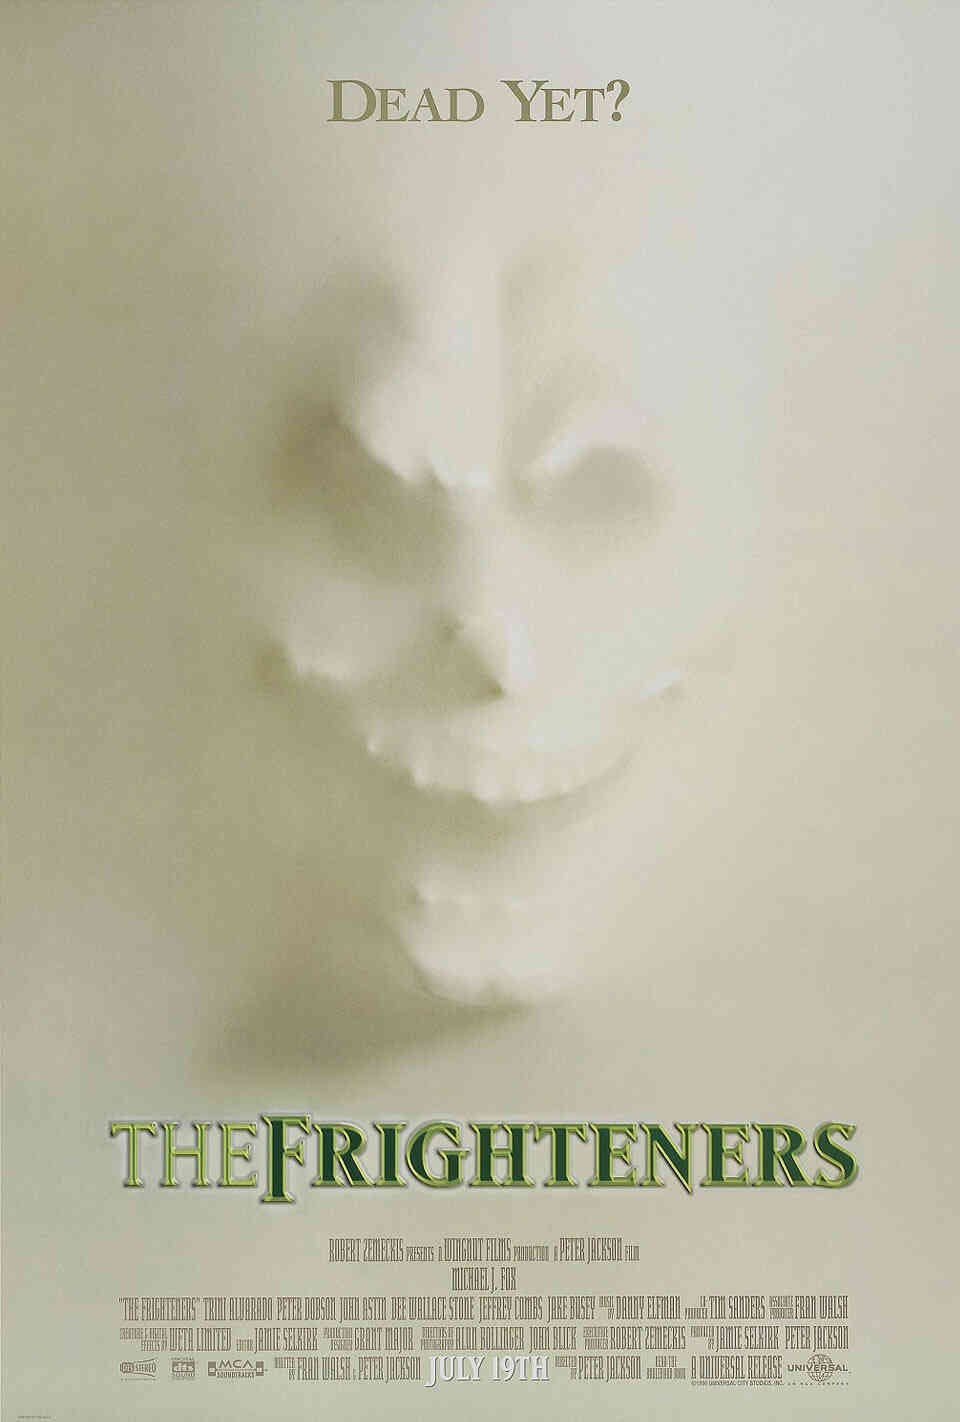 Read The Frighteners screenplay (poster)